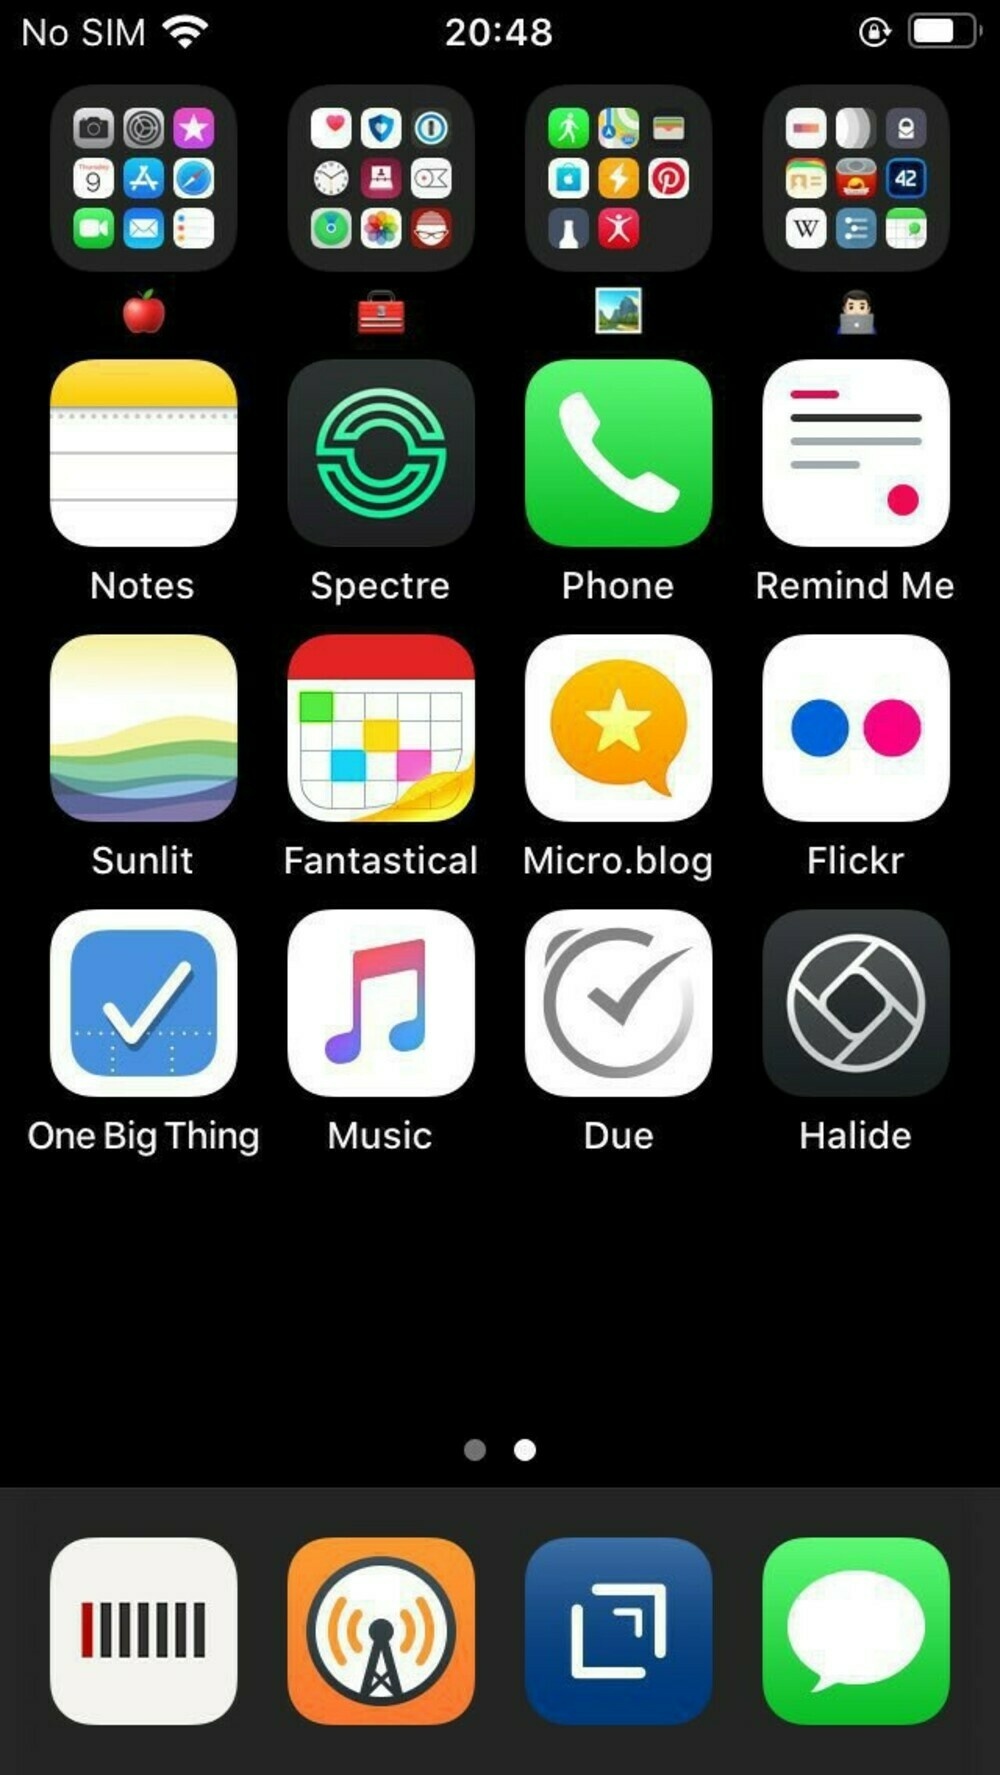 Screenshot of my iPhone SE as of the time of publishing.